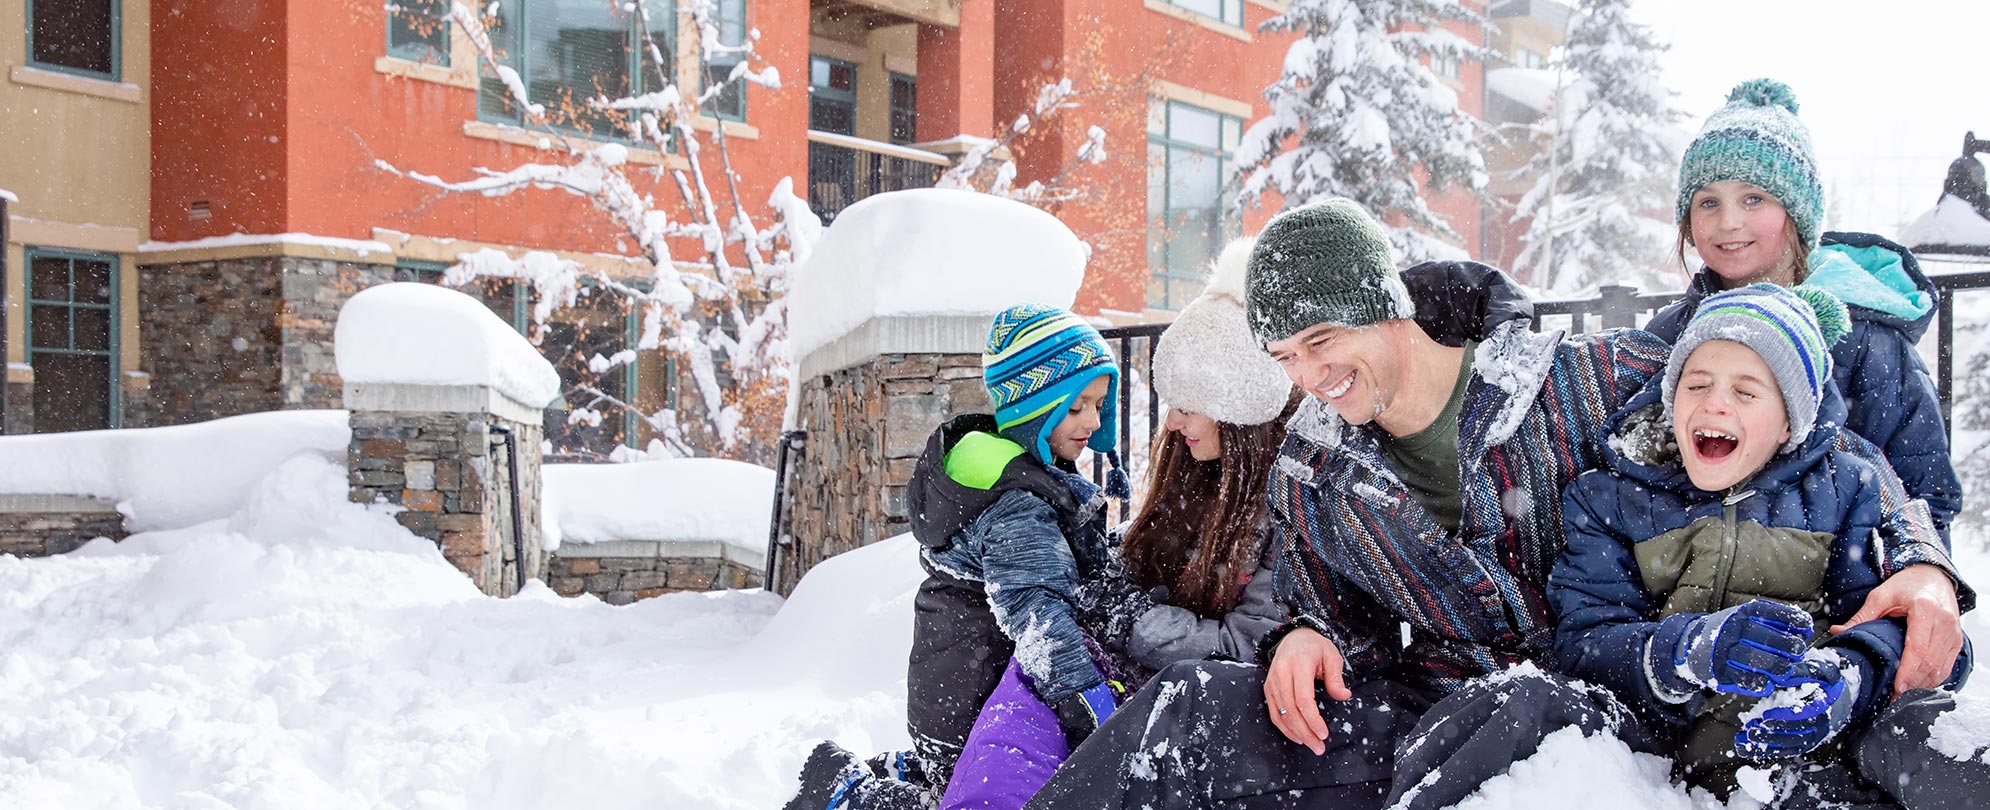 A family of five plays in the snow in front of WorldMark Park CIty resort in Utah